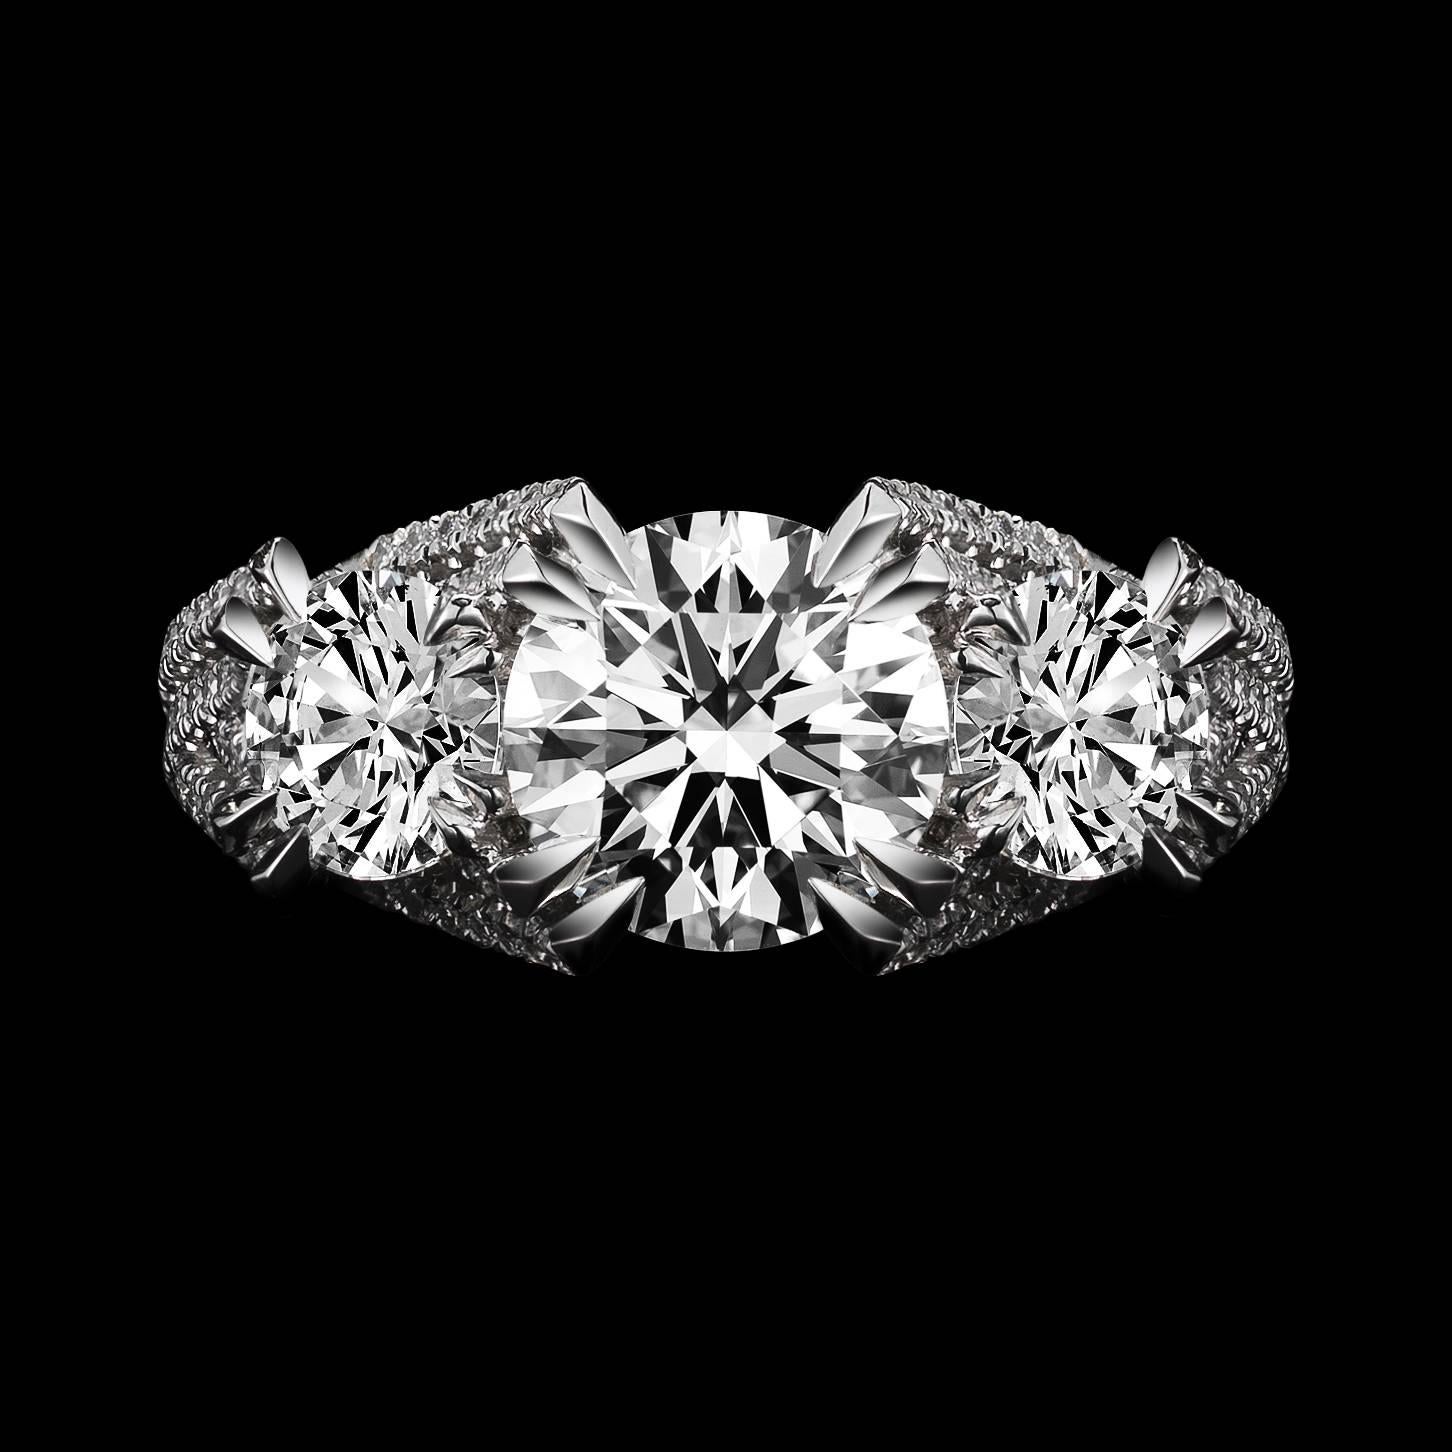 *This design is available with center diamonds weighing from 1ct - 10 cts and larger.  Please contact us for more information on this piece or on creating your own custom Alexandra Mor Design.  

This Alexandra Mor original three-stone woven ring